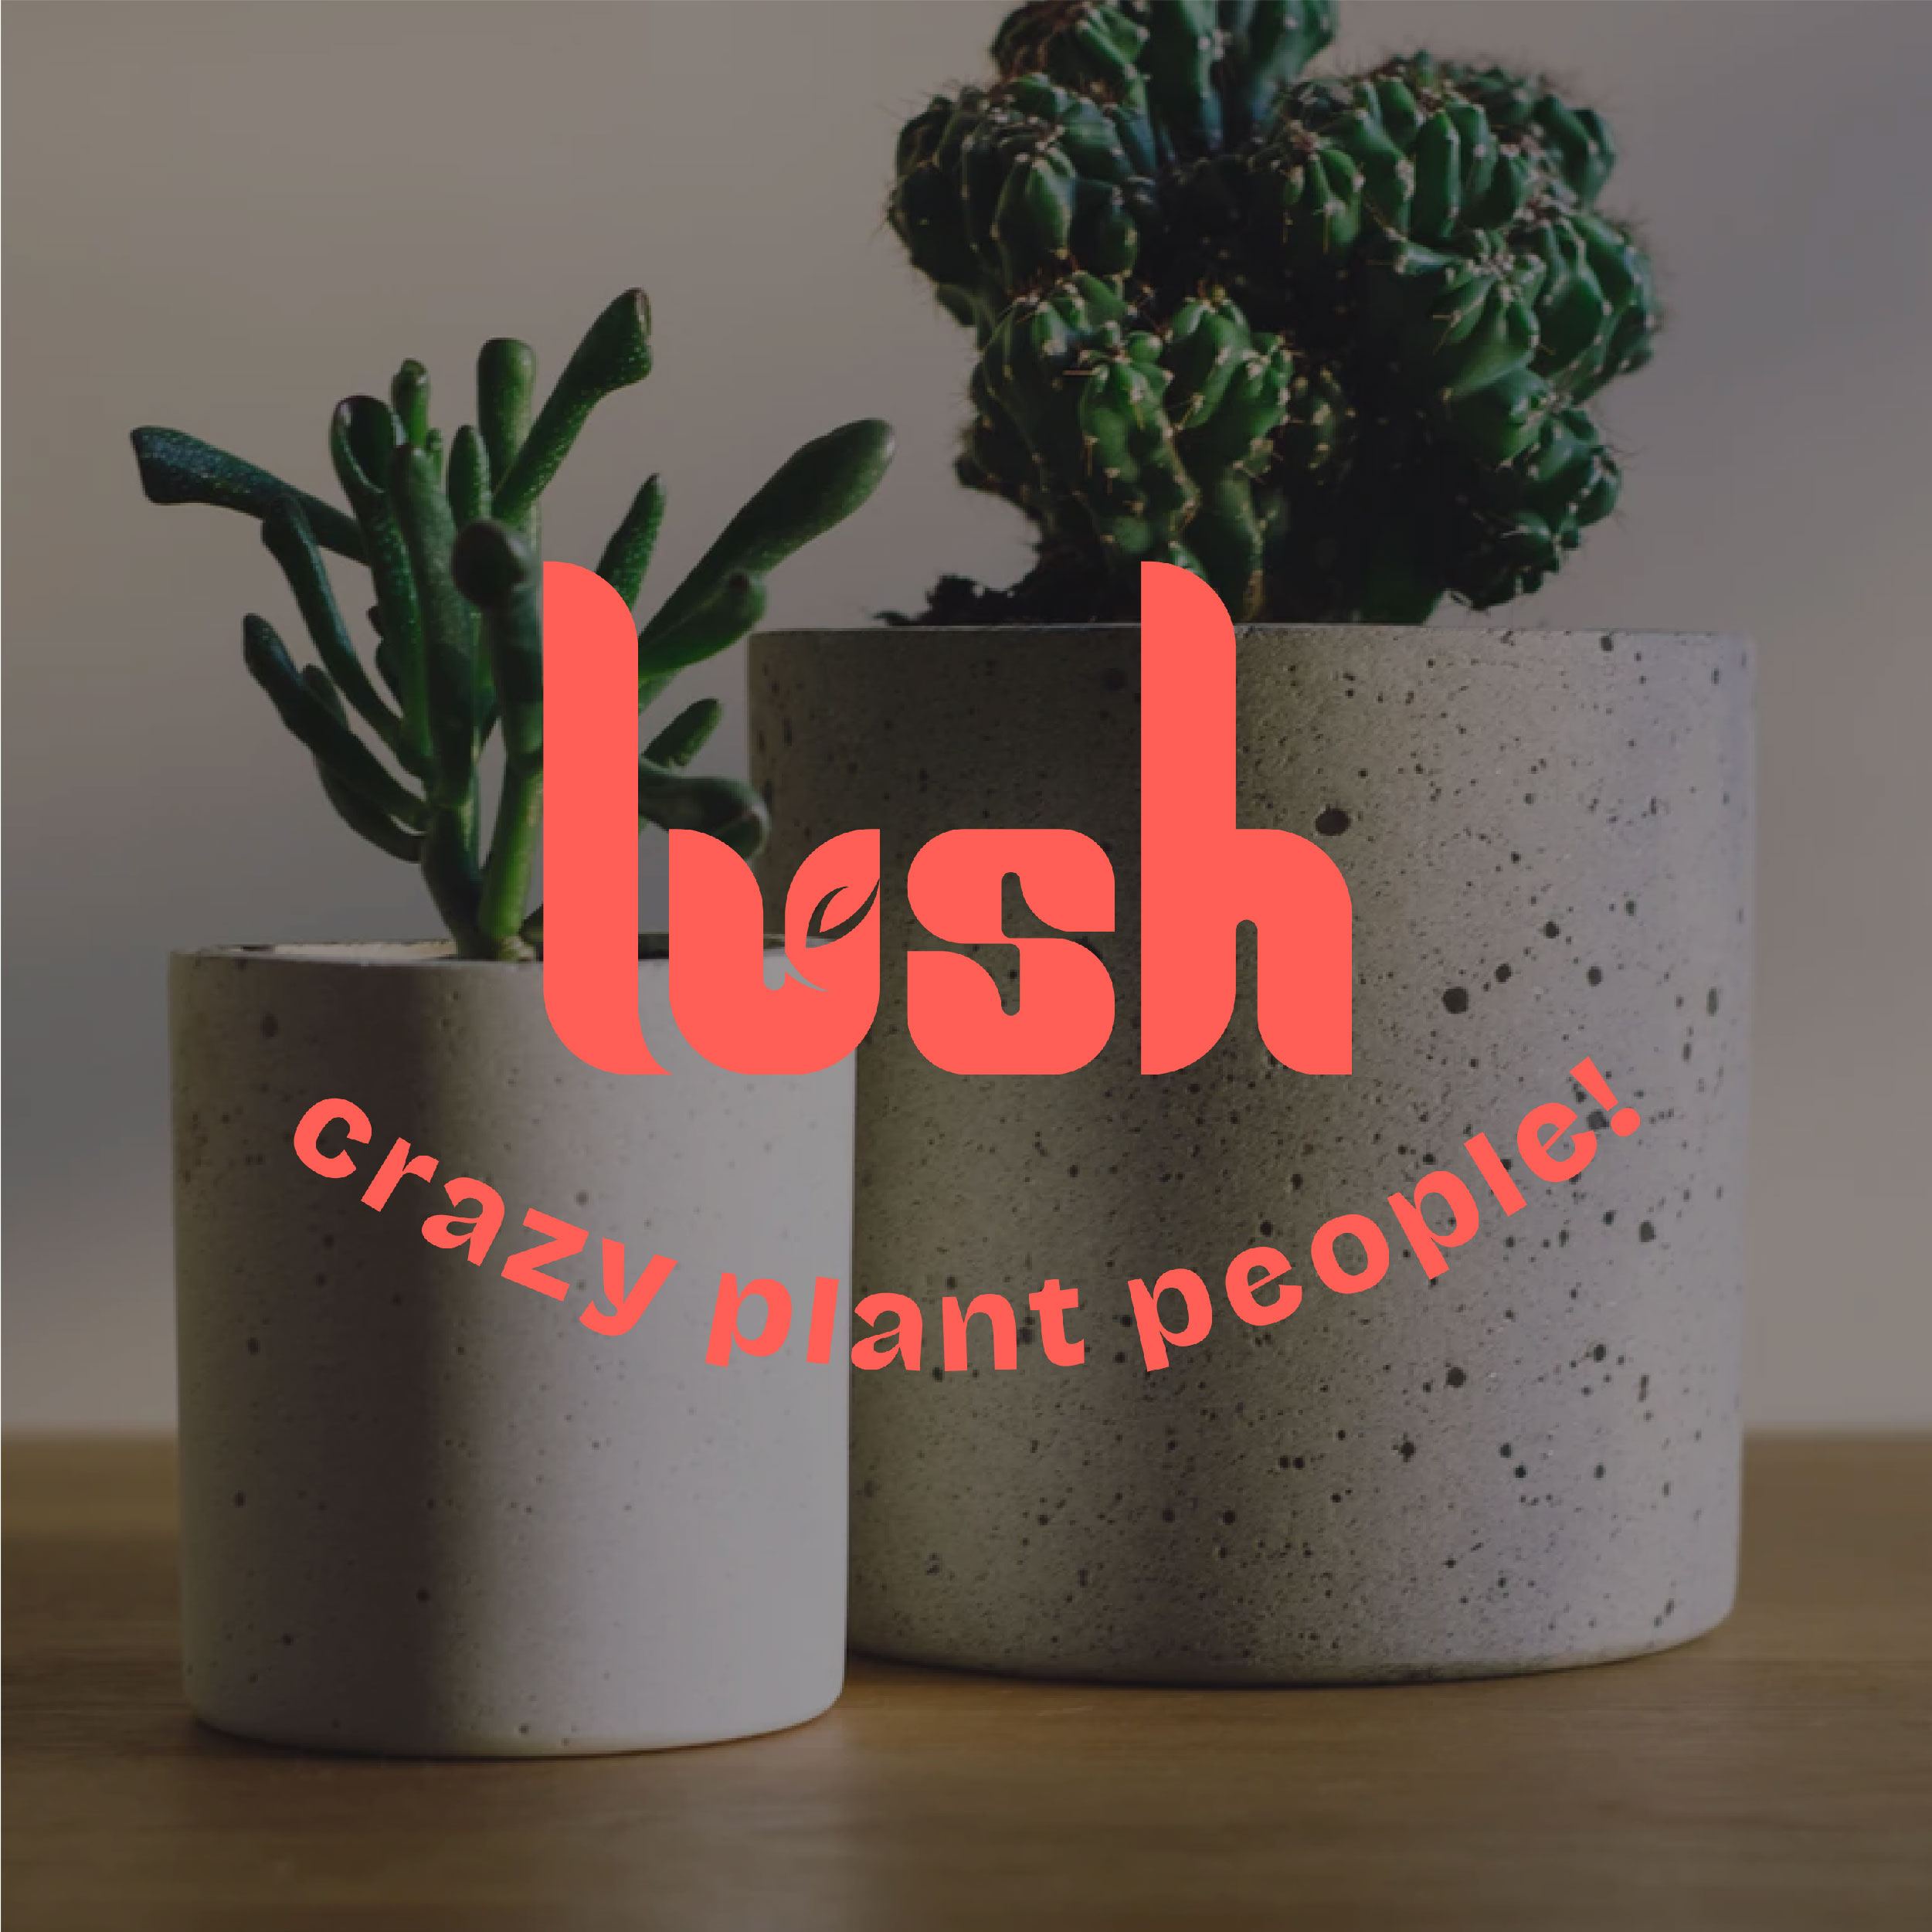 Lush Crazy Plant People Branding Designed by Aishwarya Agrawal